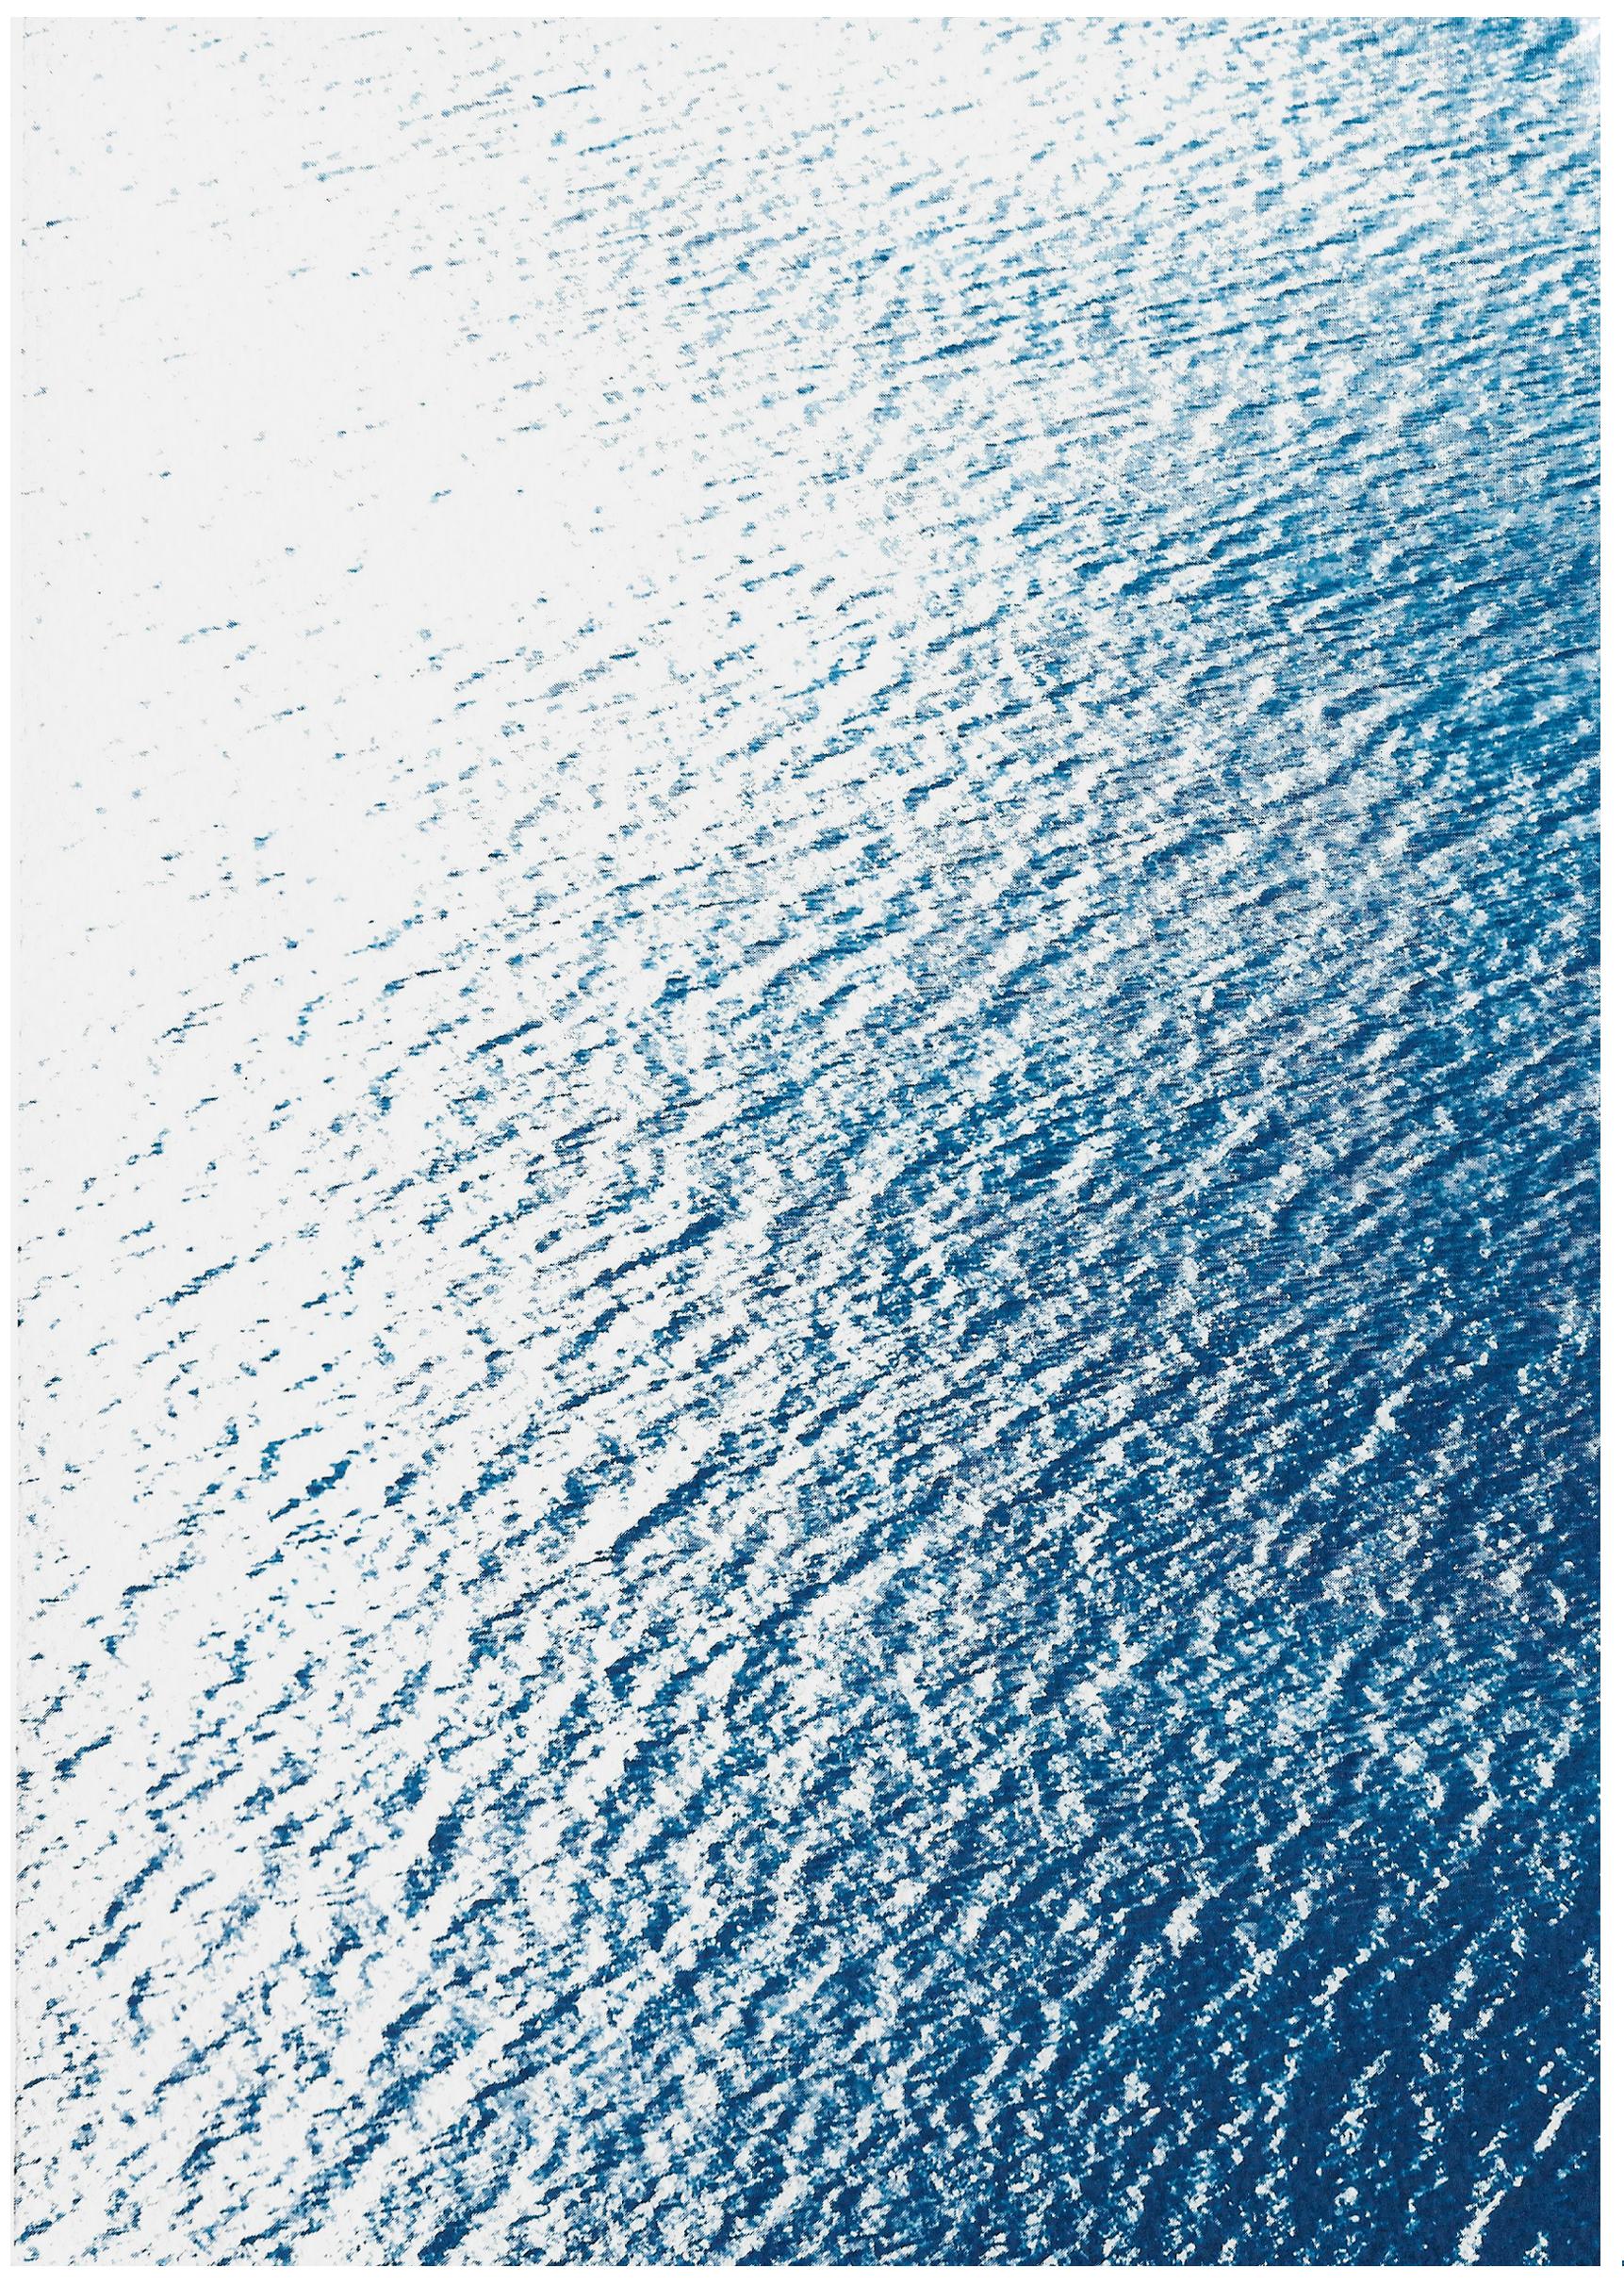 This is an exclusive handprinted limited edition cyanotype.

Details:
+ Title: Smooth Bay in the Mediterranean
+ Year: 2021
+ Edition Size: 20
+ Stamped and Certificate of Authenticity provided
+ Measurements : 100x140 cm (40 x 55 in.) Each paper